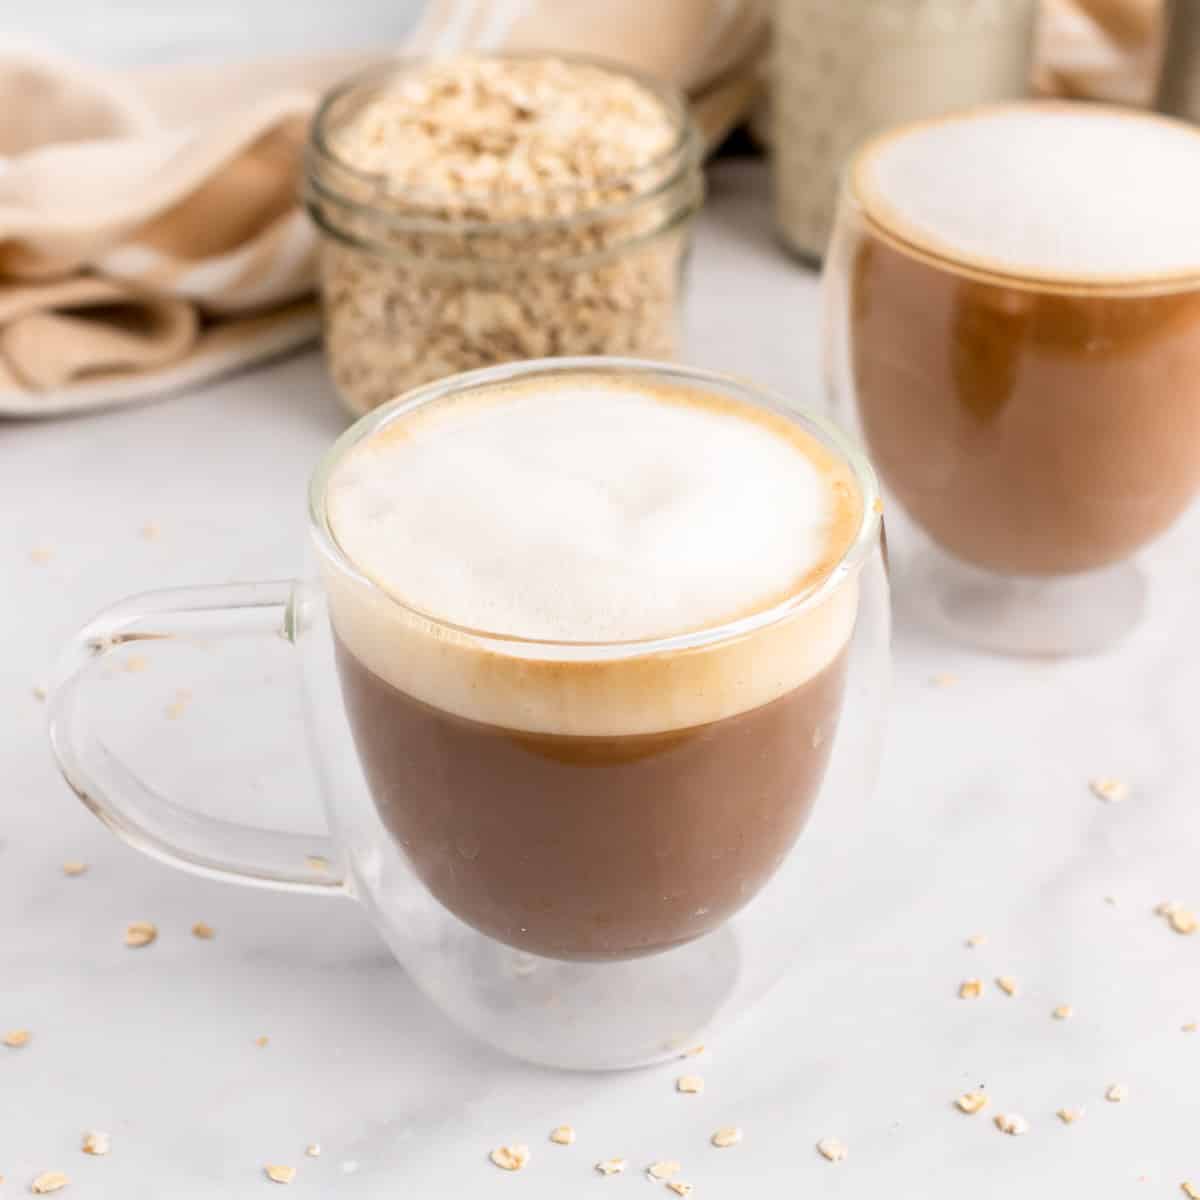 Can You Froth Oat Milk with a Milk Frother?